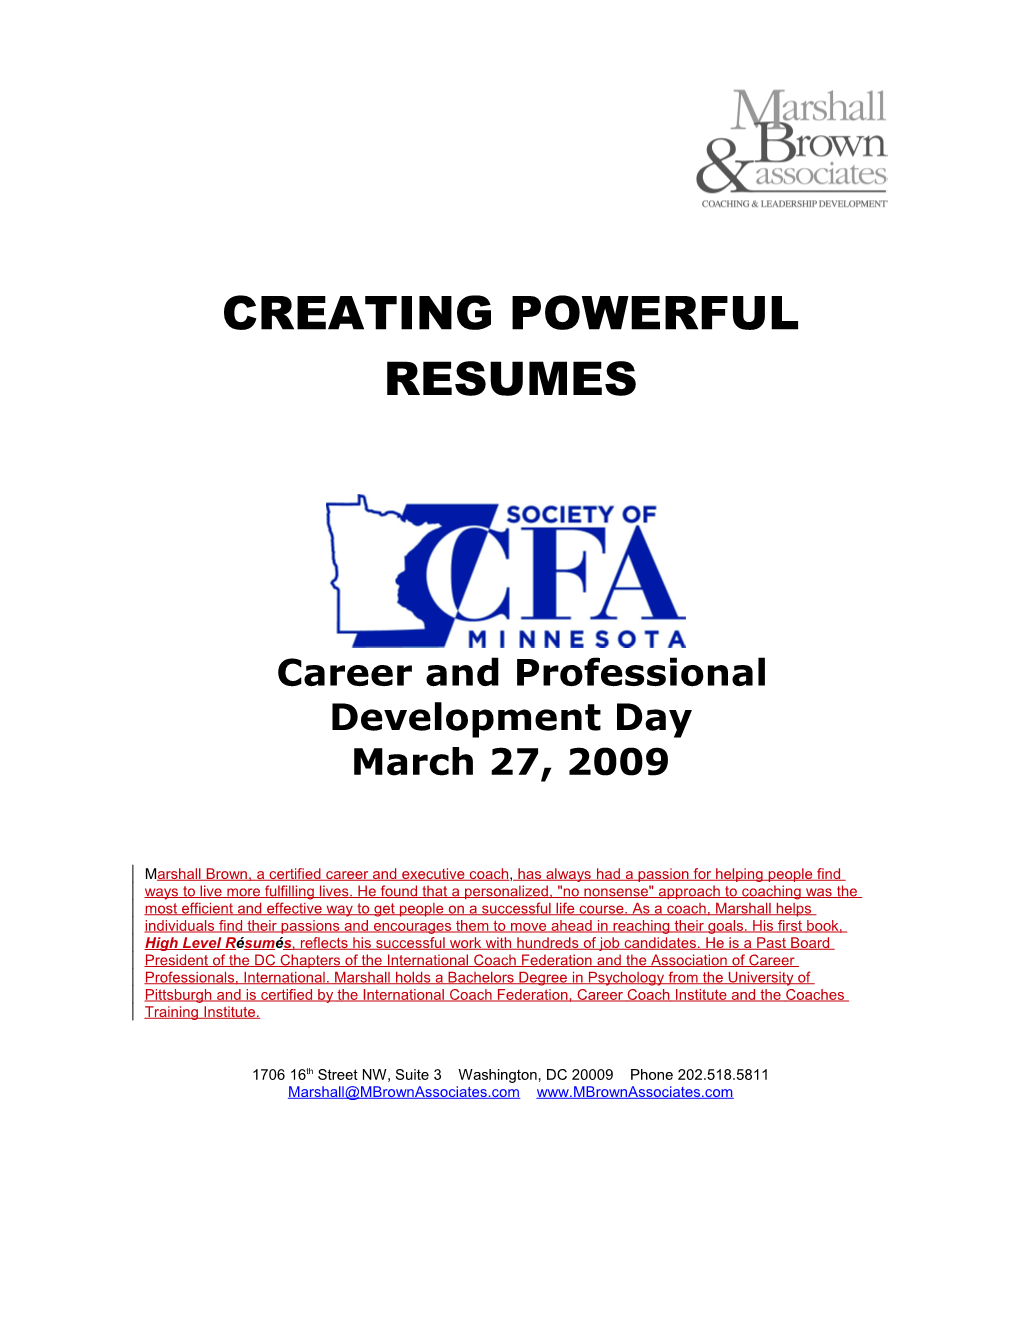 Career and Professional Development Day